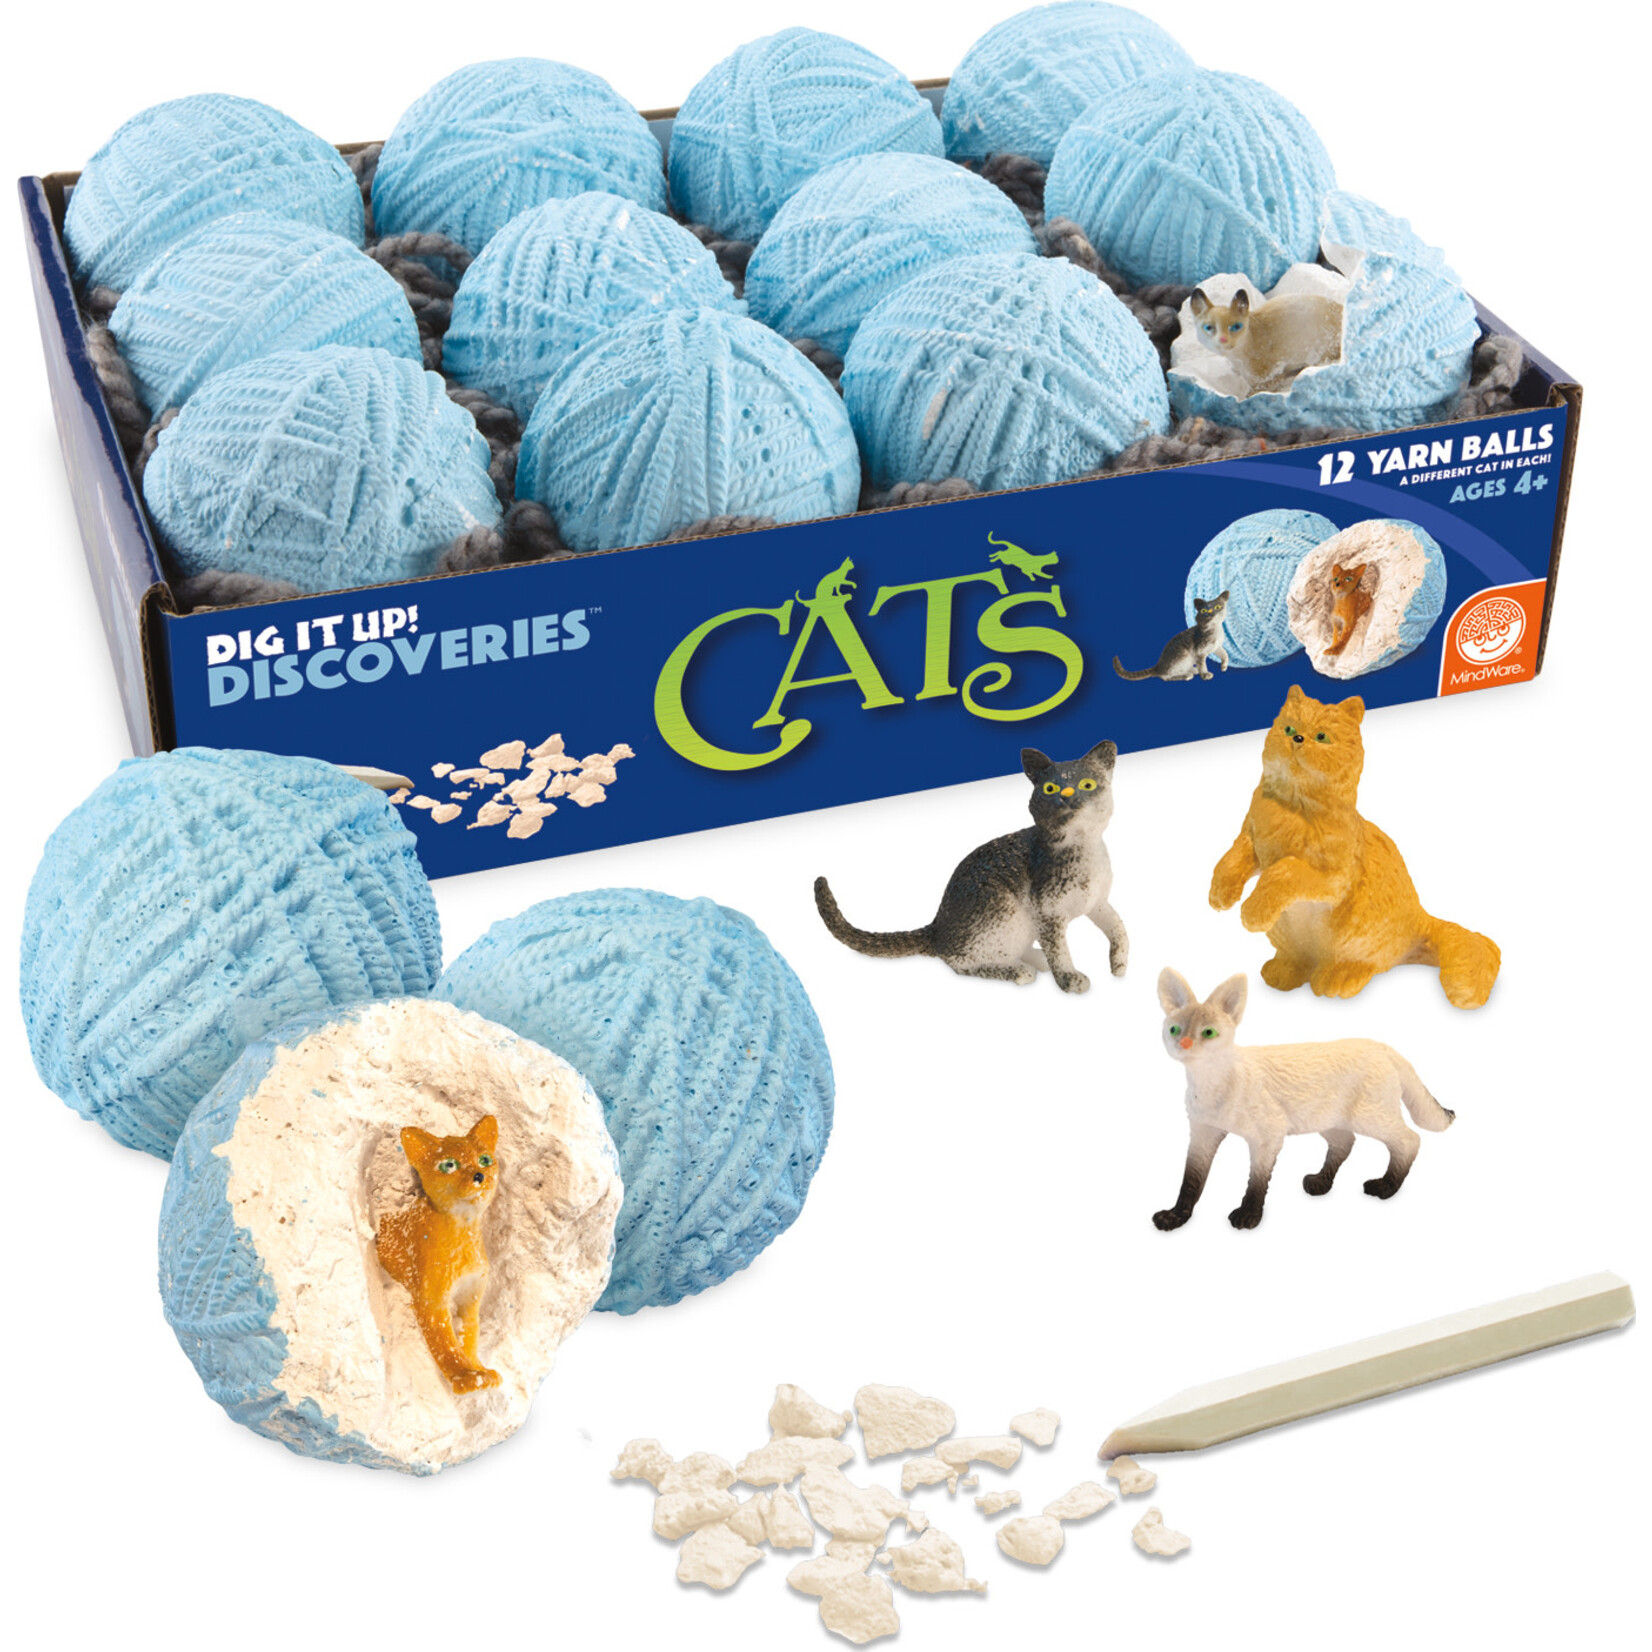 MW Wholesale Dig It Up - Cats Box of 12